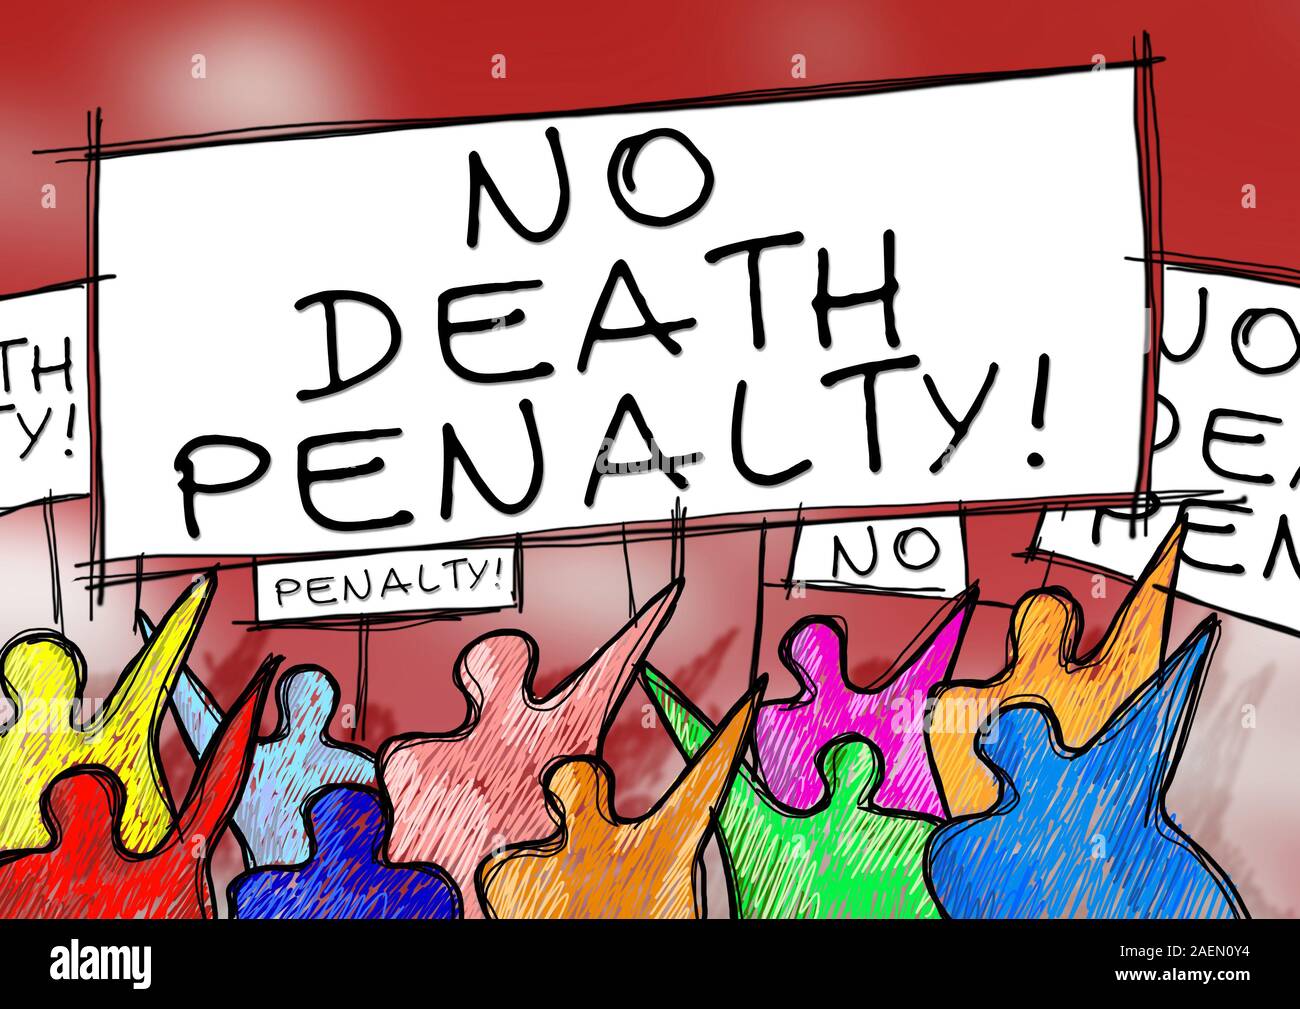 A group of people protesting against executions - concept image Stock Photo